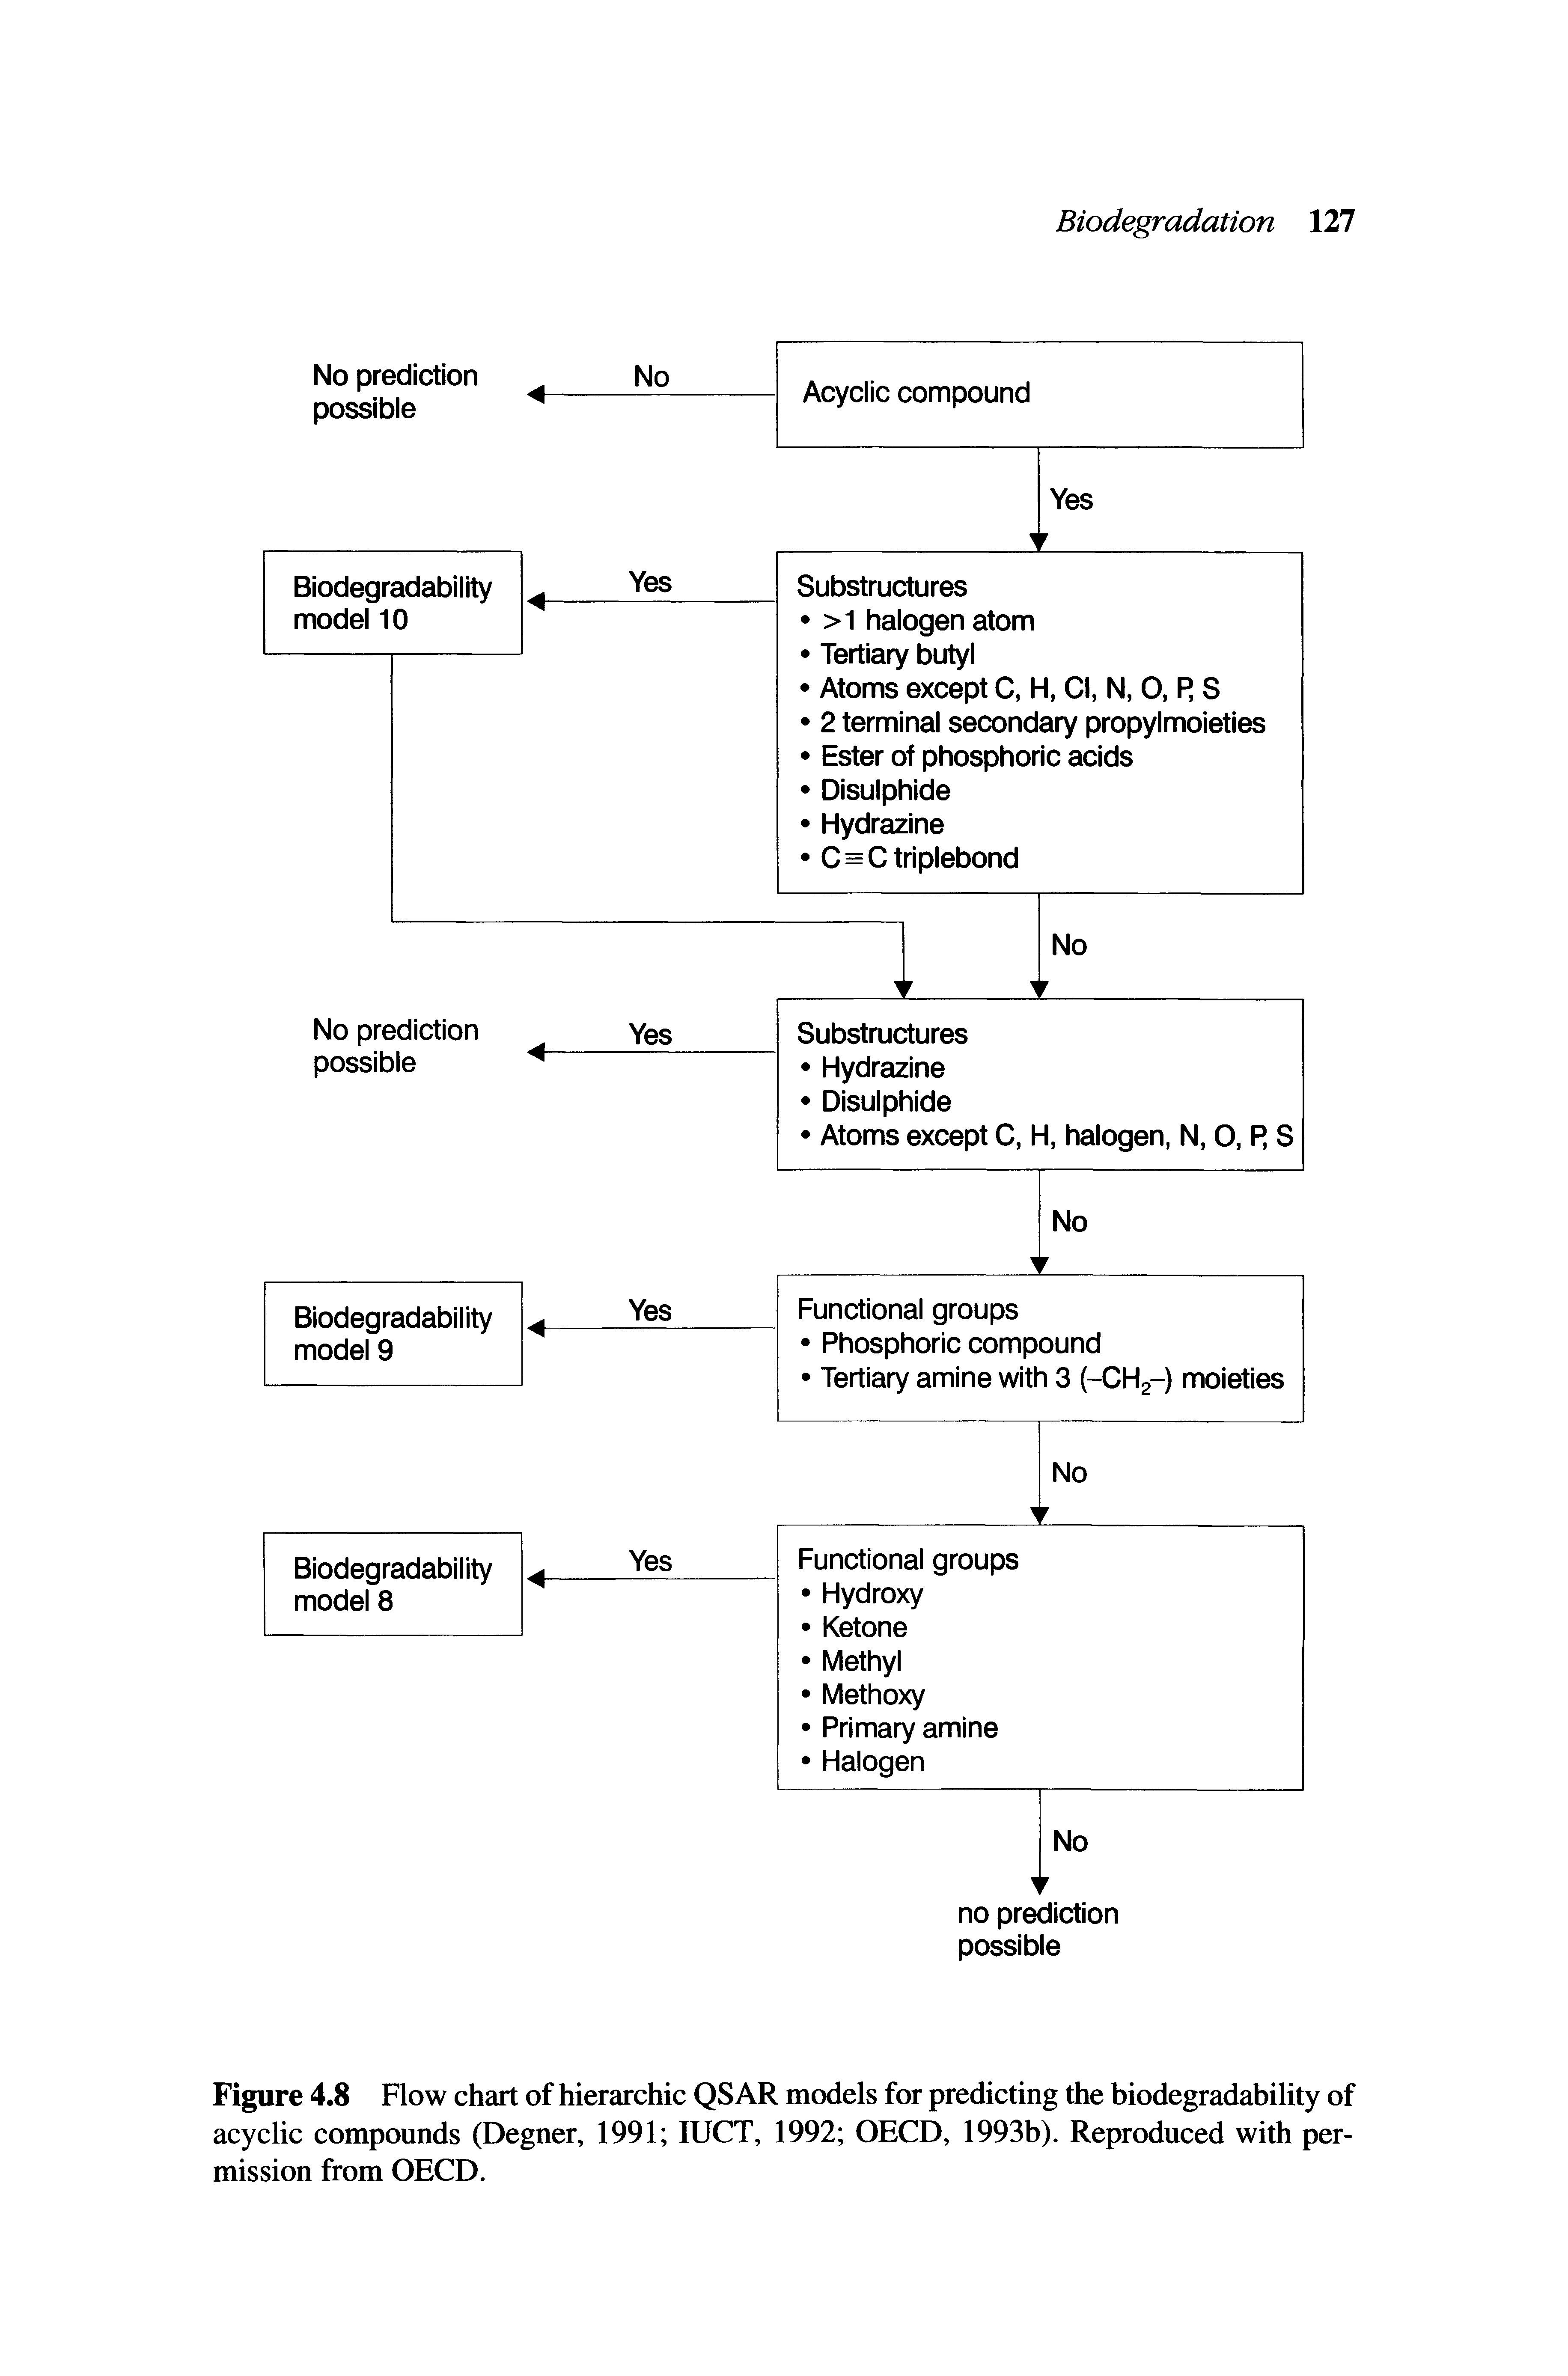 Figure 4.8 Flow chart of hierarchic QS AR models for predicting the biodegradability of acyclic compounds (Degner, 1991 lUCT, 1992 OECD, 1993b). Reproduced with permission from OECD.